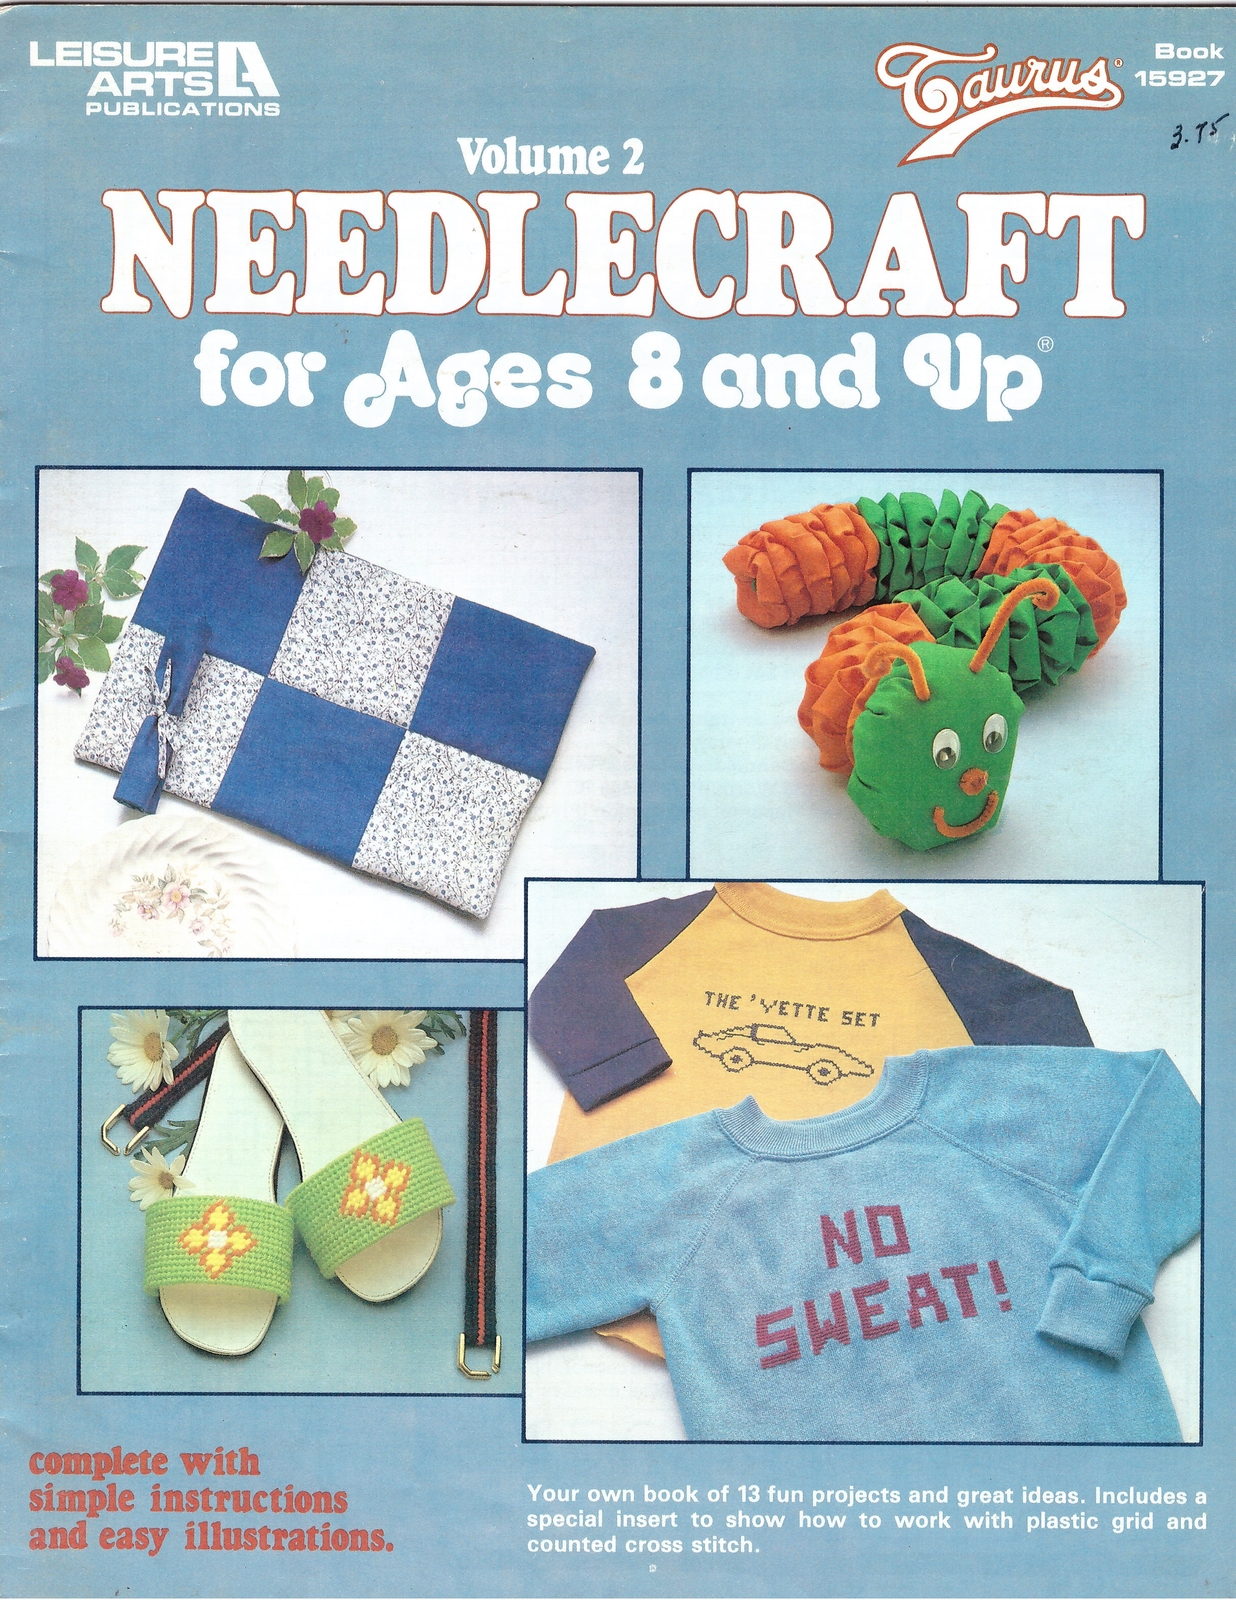 Needlecraft For Ages 8 And Up Vol 2 Leisure Arts Booklet 15927 Vintage 1983 - $6.99